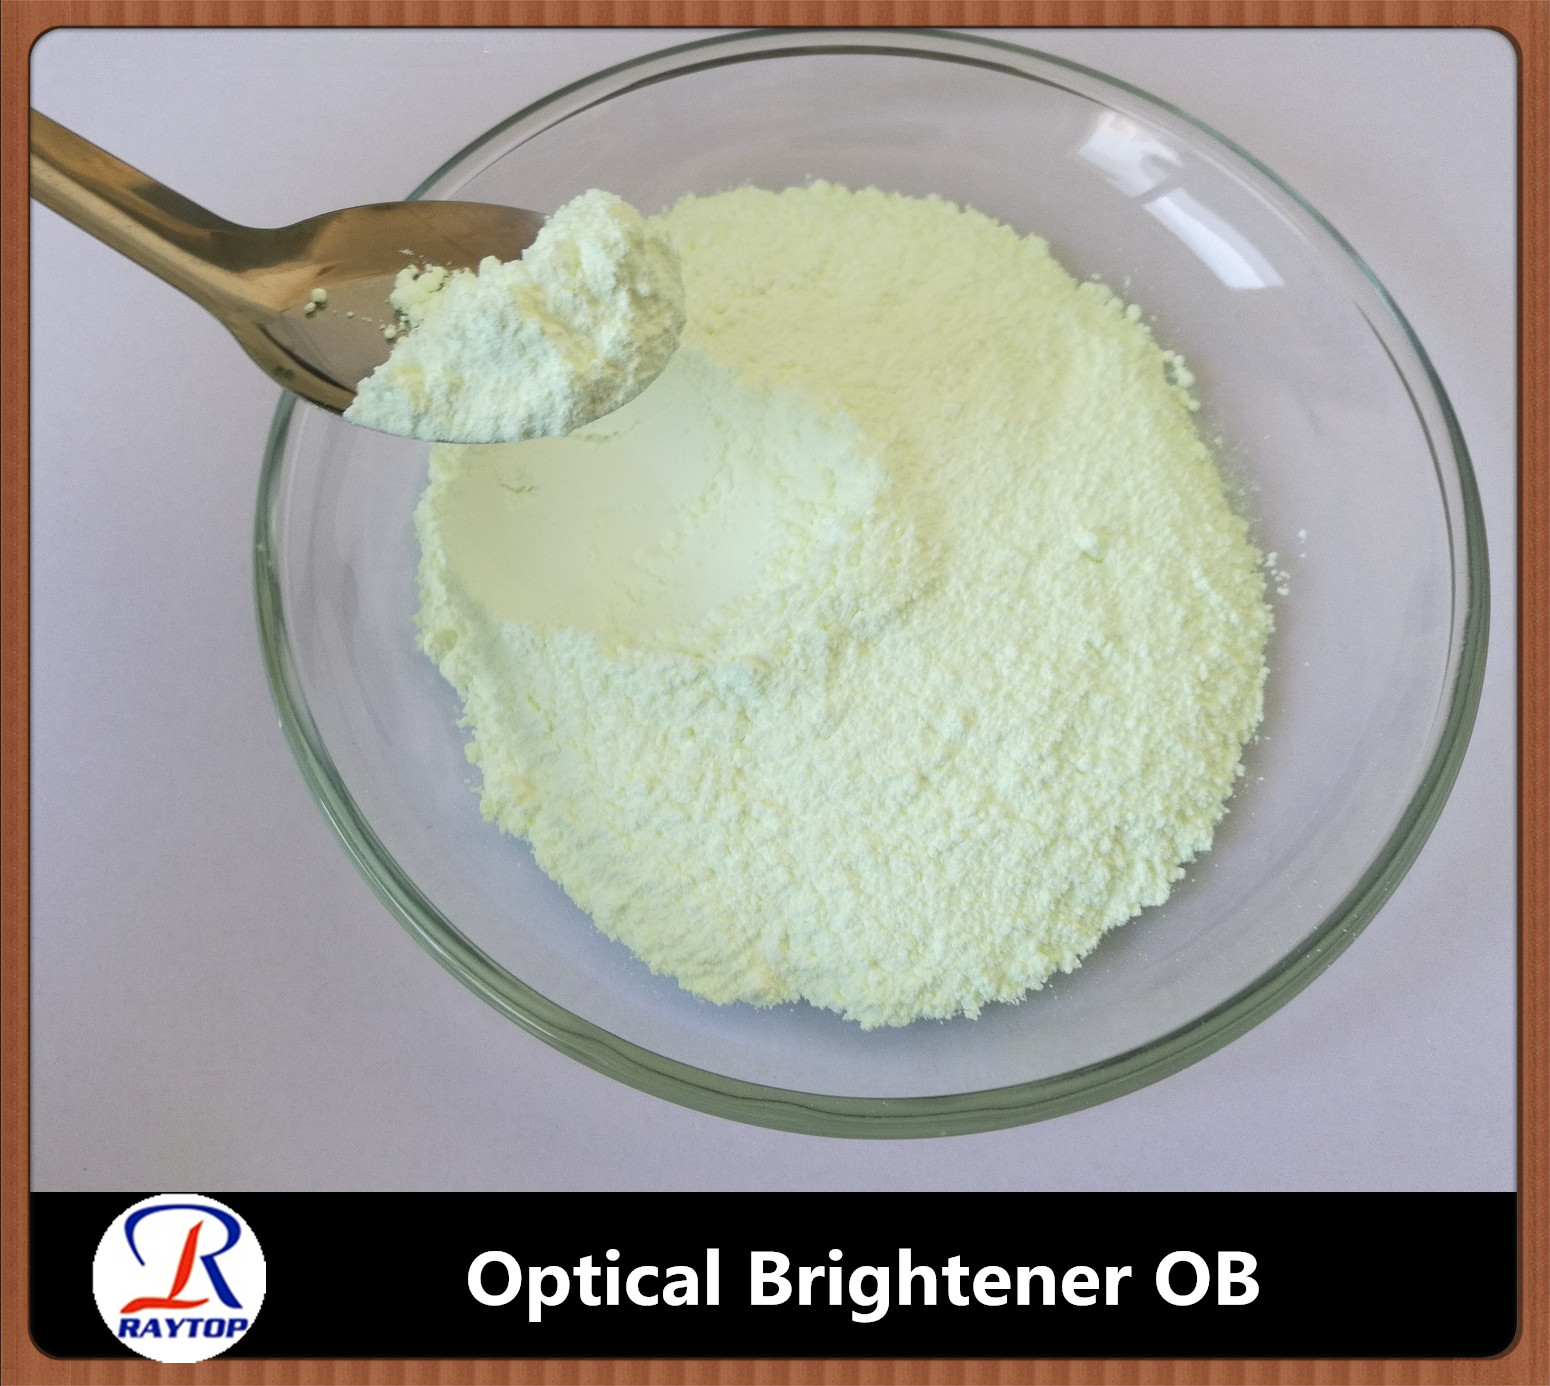 OPTICAL BRIGHTENNING AGENT OB for coating